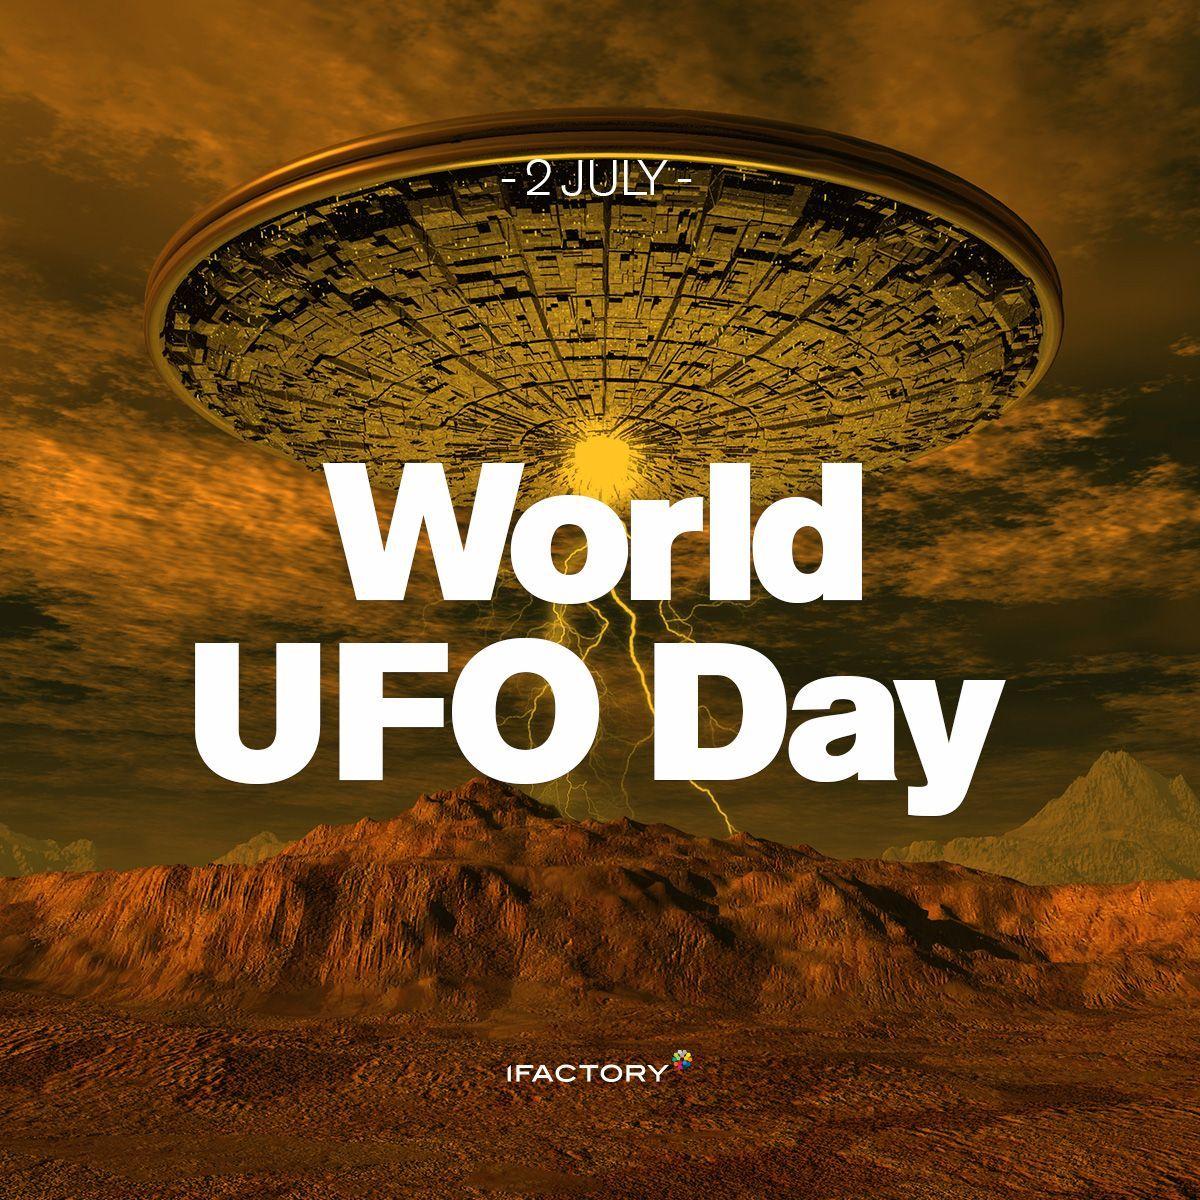 The 2nd of July just happens to be World UFO Day so keep your eyes